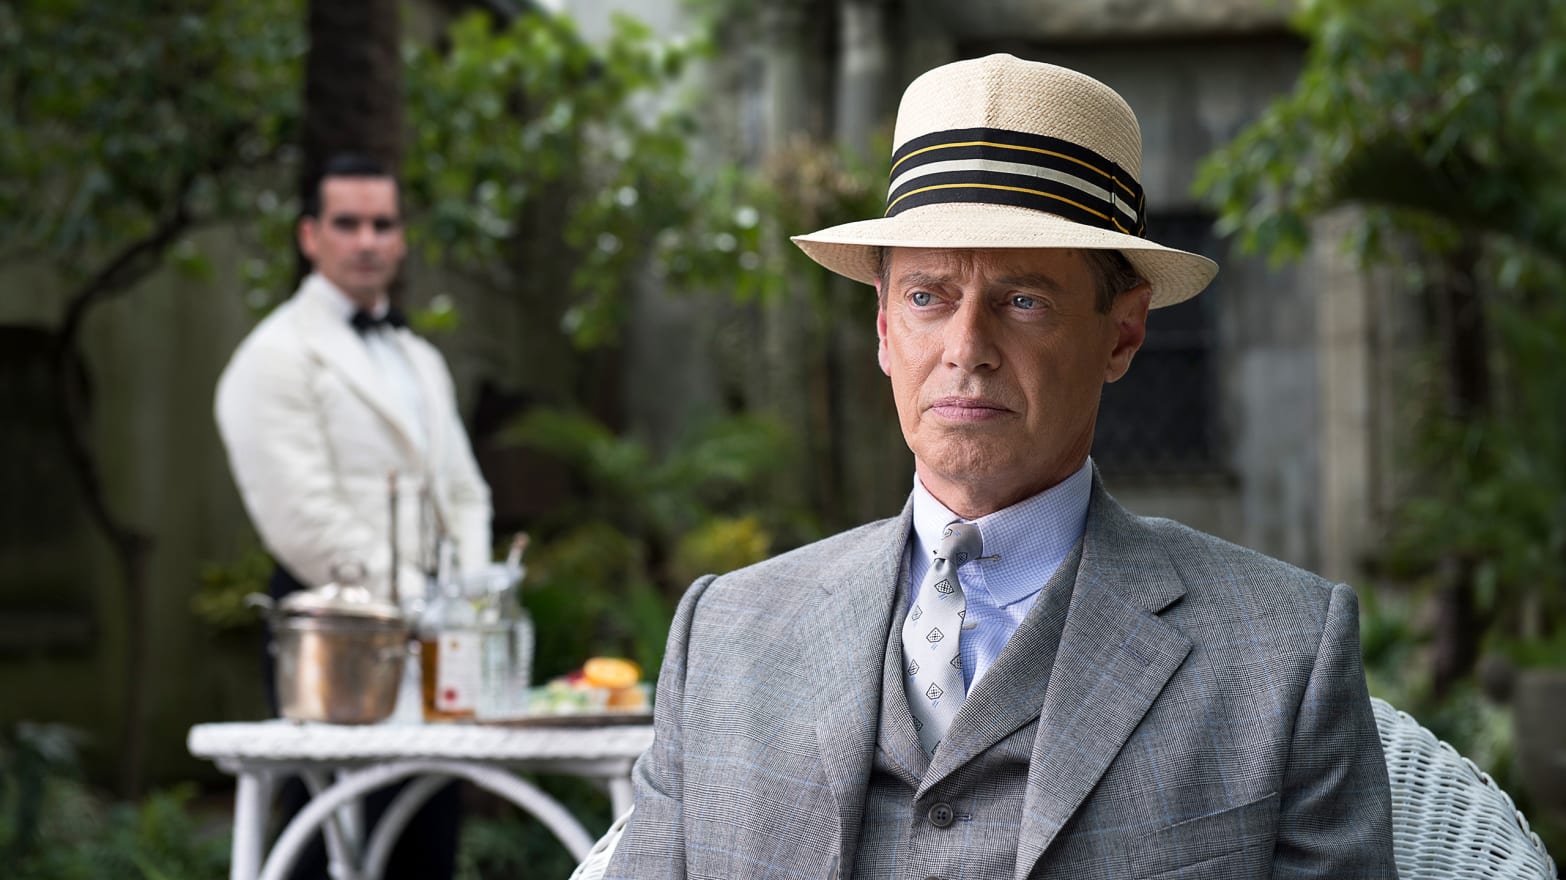 Boardwalk Empire Left New Jersey and Lost Its